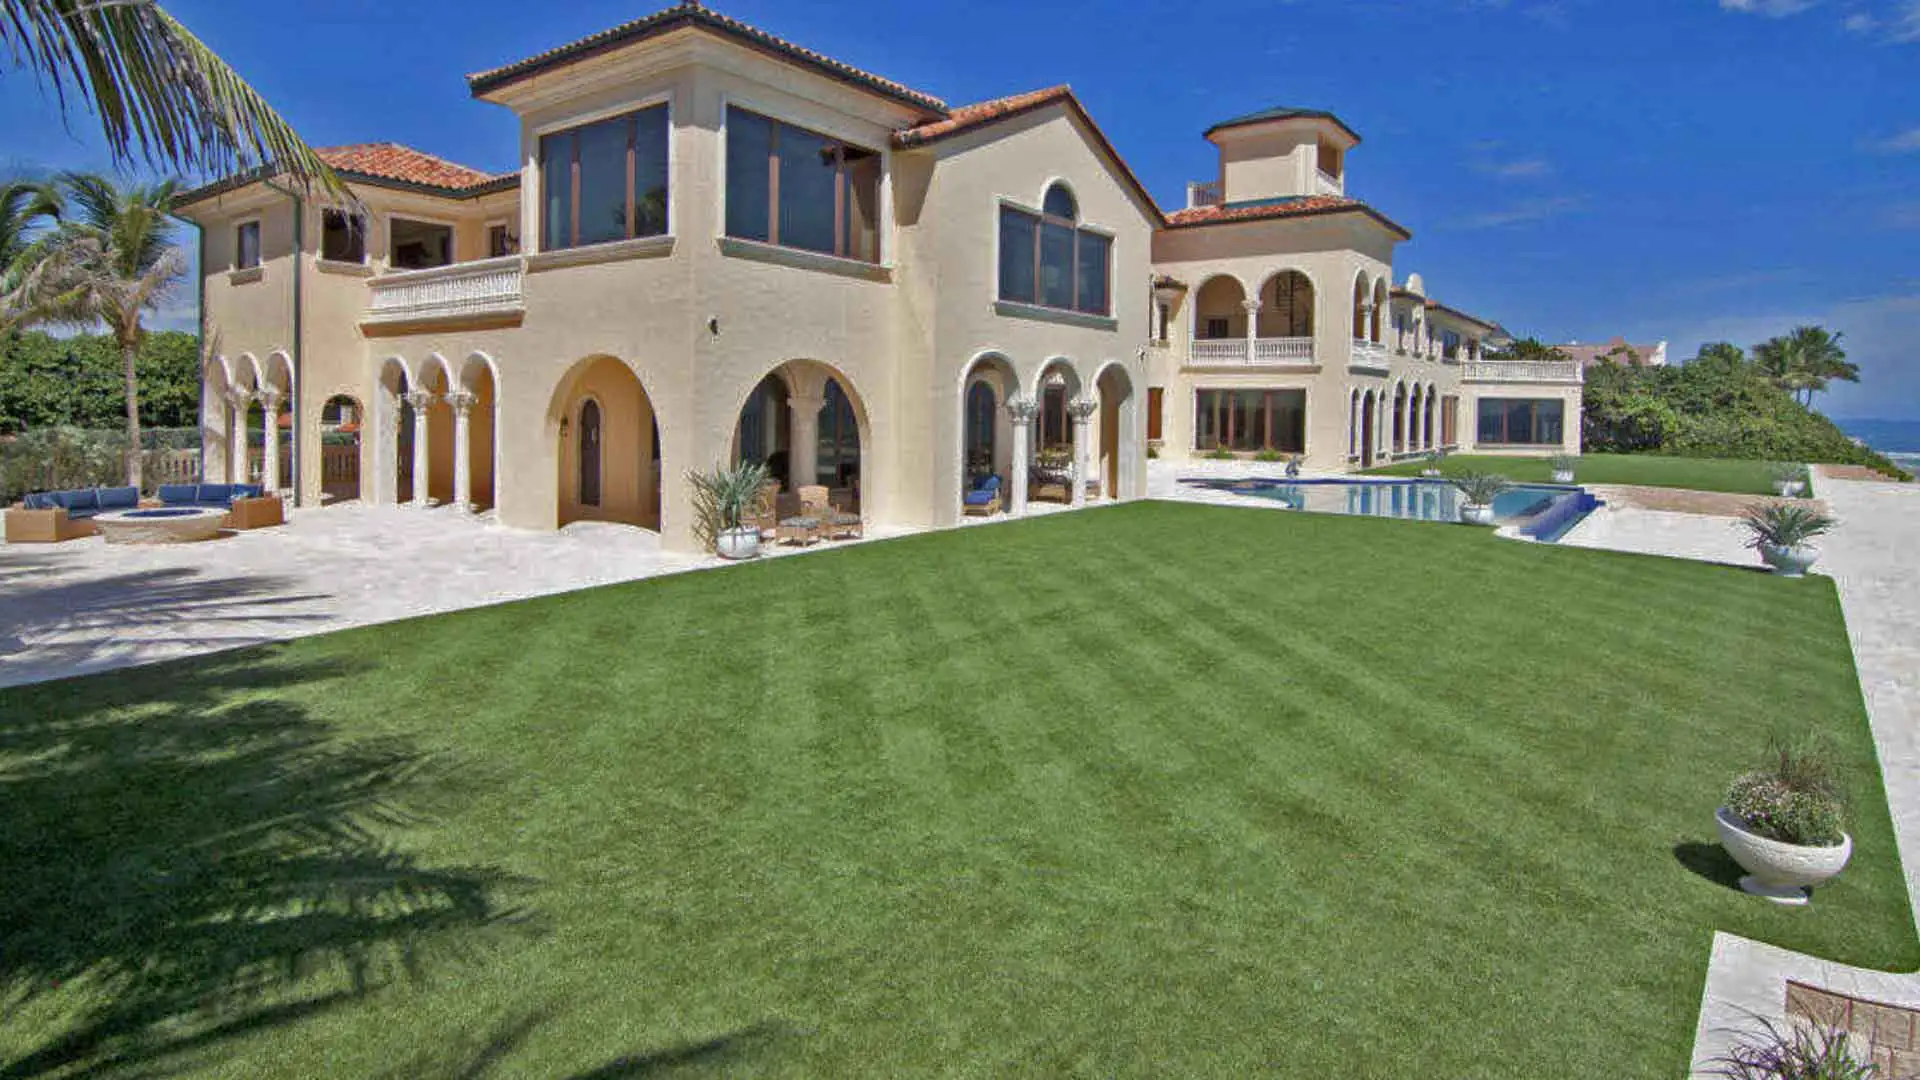 Large estate in Palm Beach, FL with grounds maintenance by Greenscape Design.